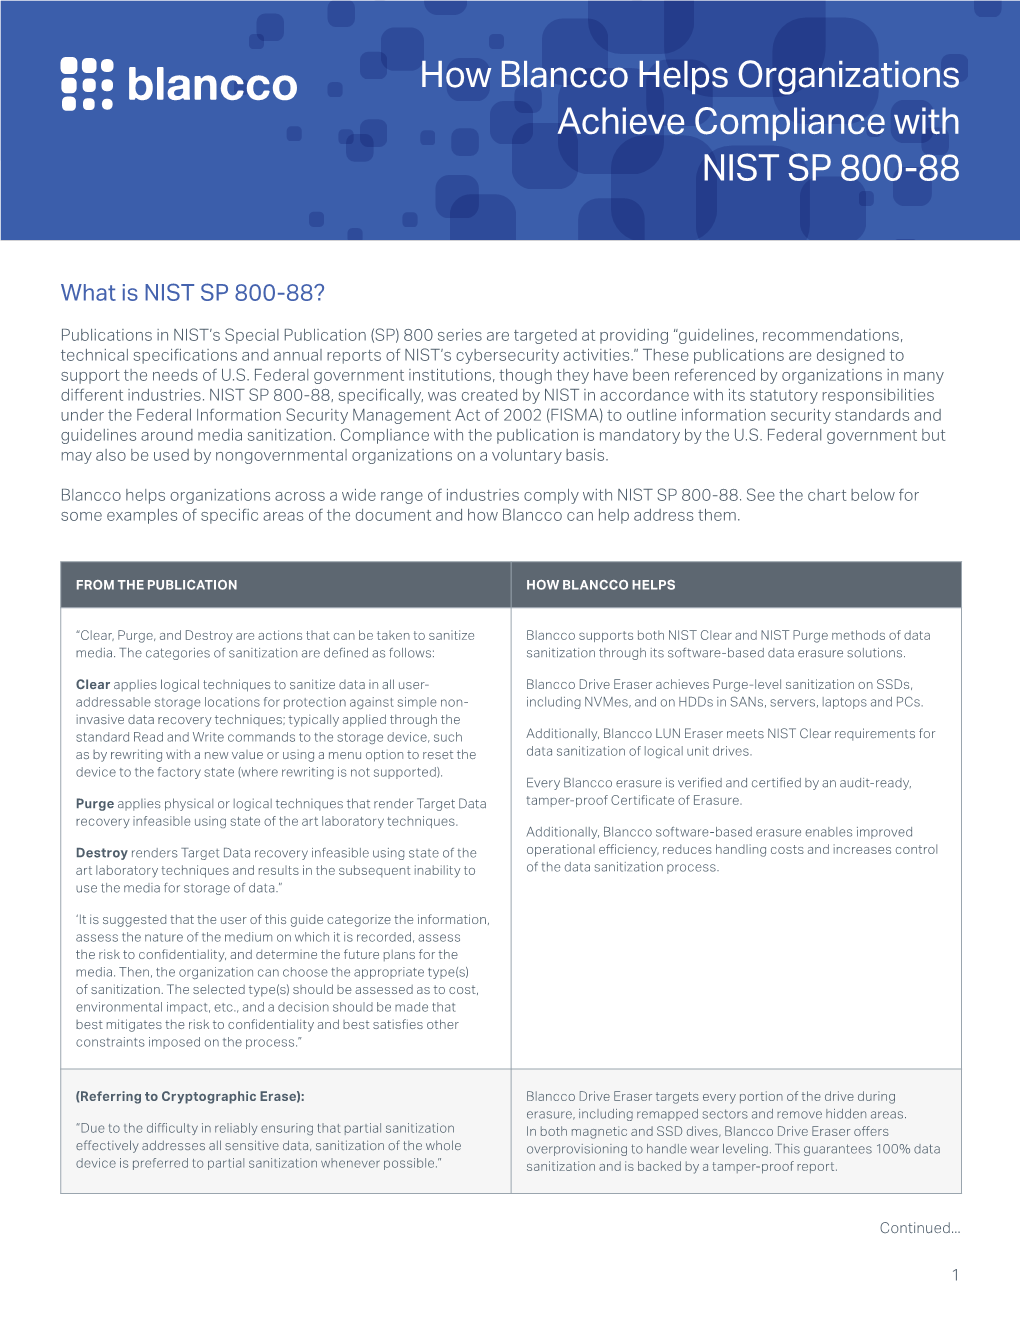 How Blancco Helps Organizations Achieve Compliance with NIST SP 800-88